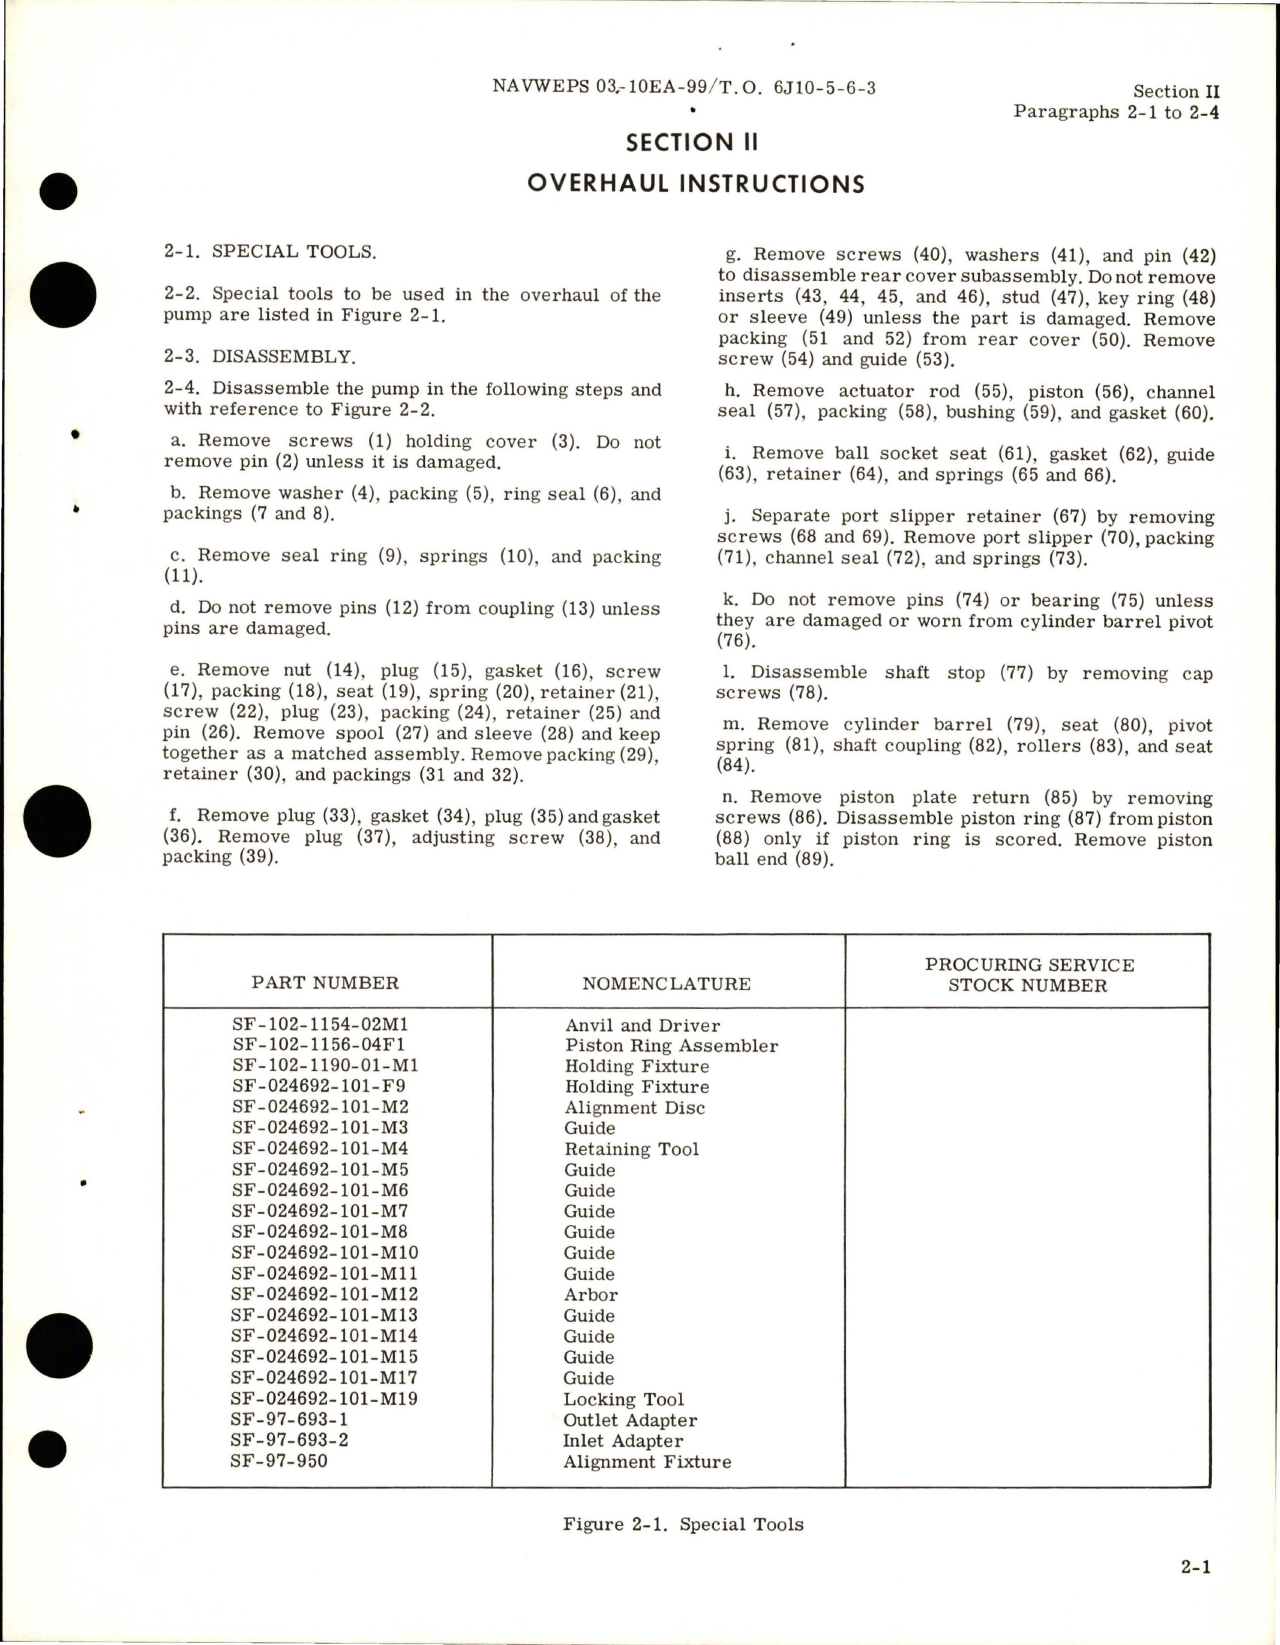 Sample page 7 from AirCorps Library document: Overhaul Instructions for Axial Piston Pump Assembly - 024692-102-14-13